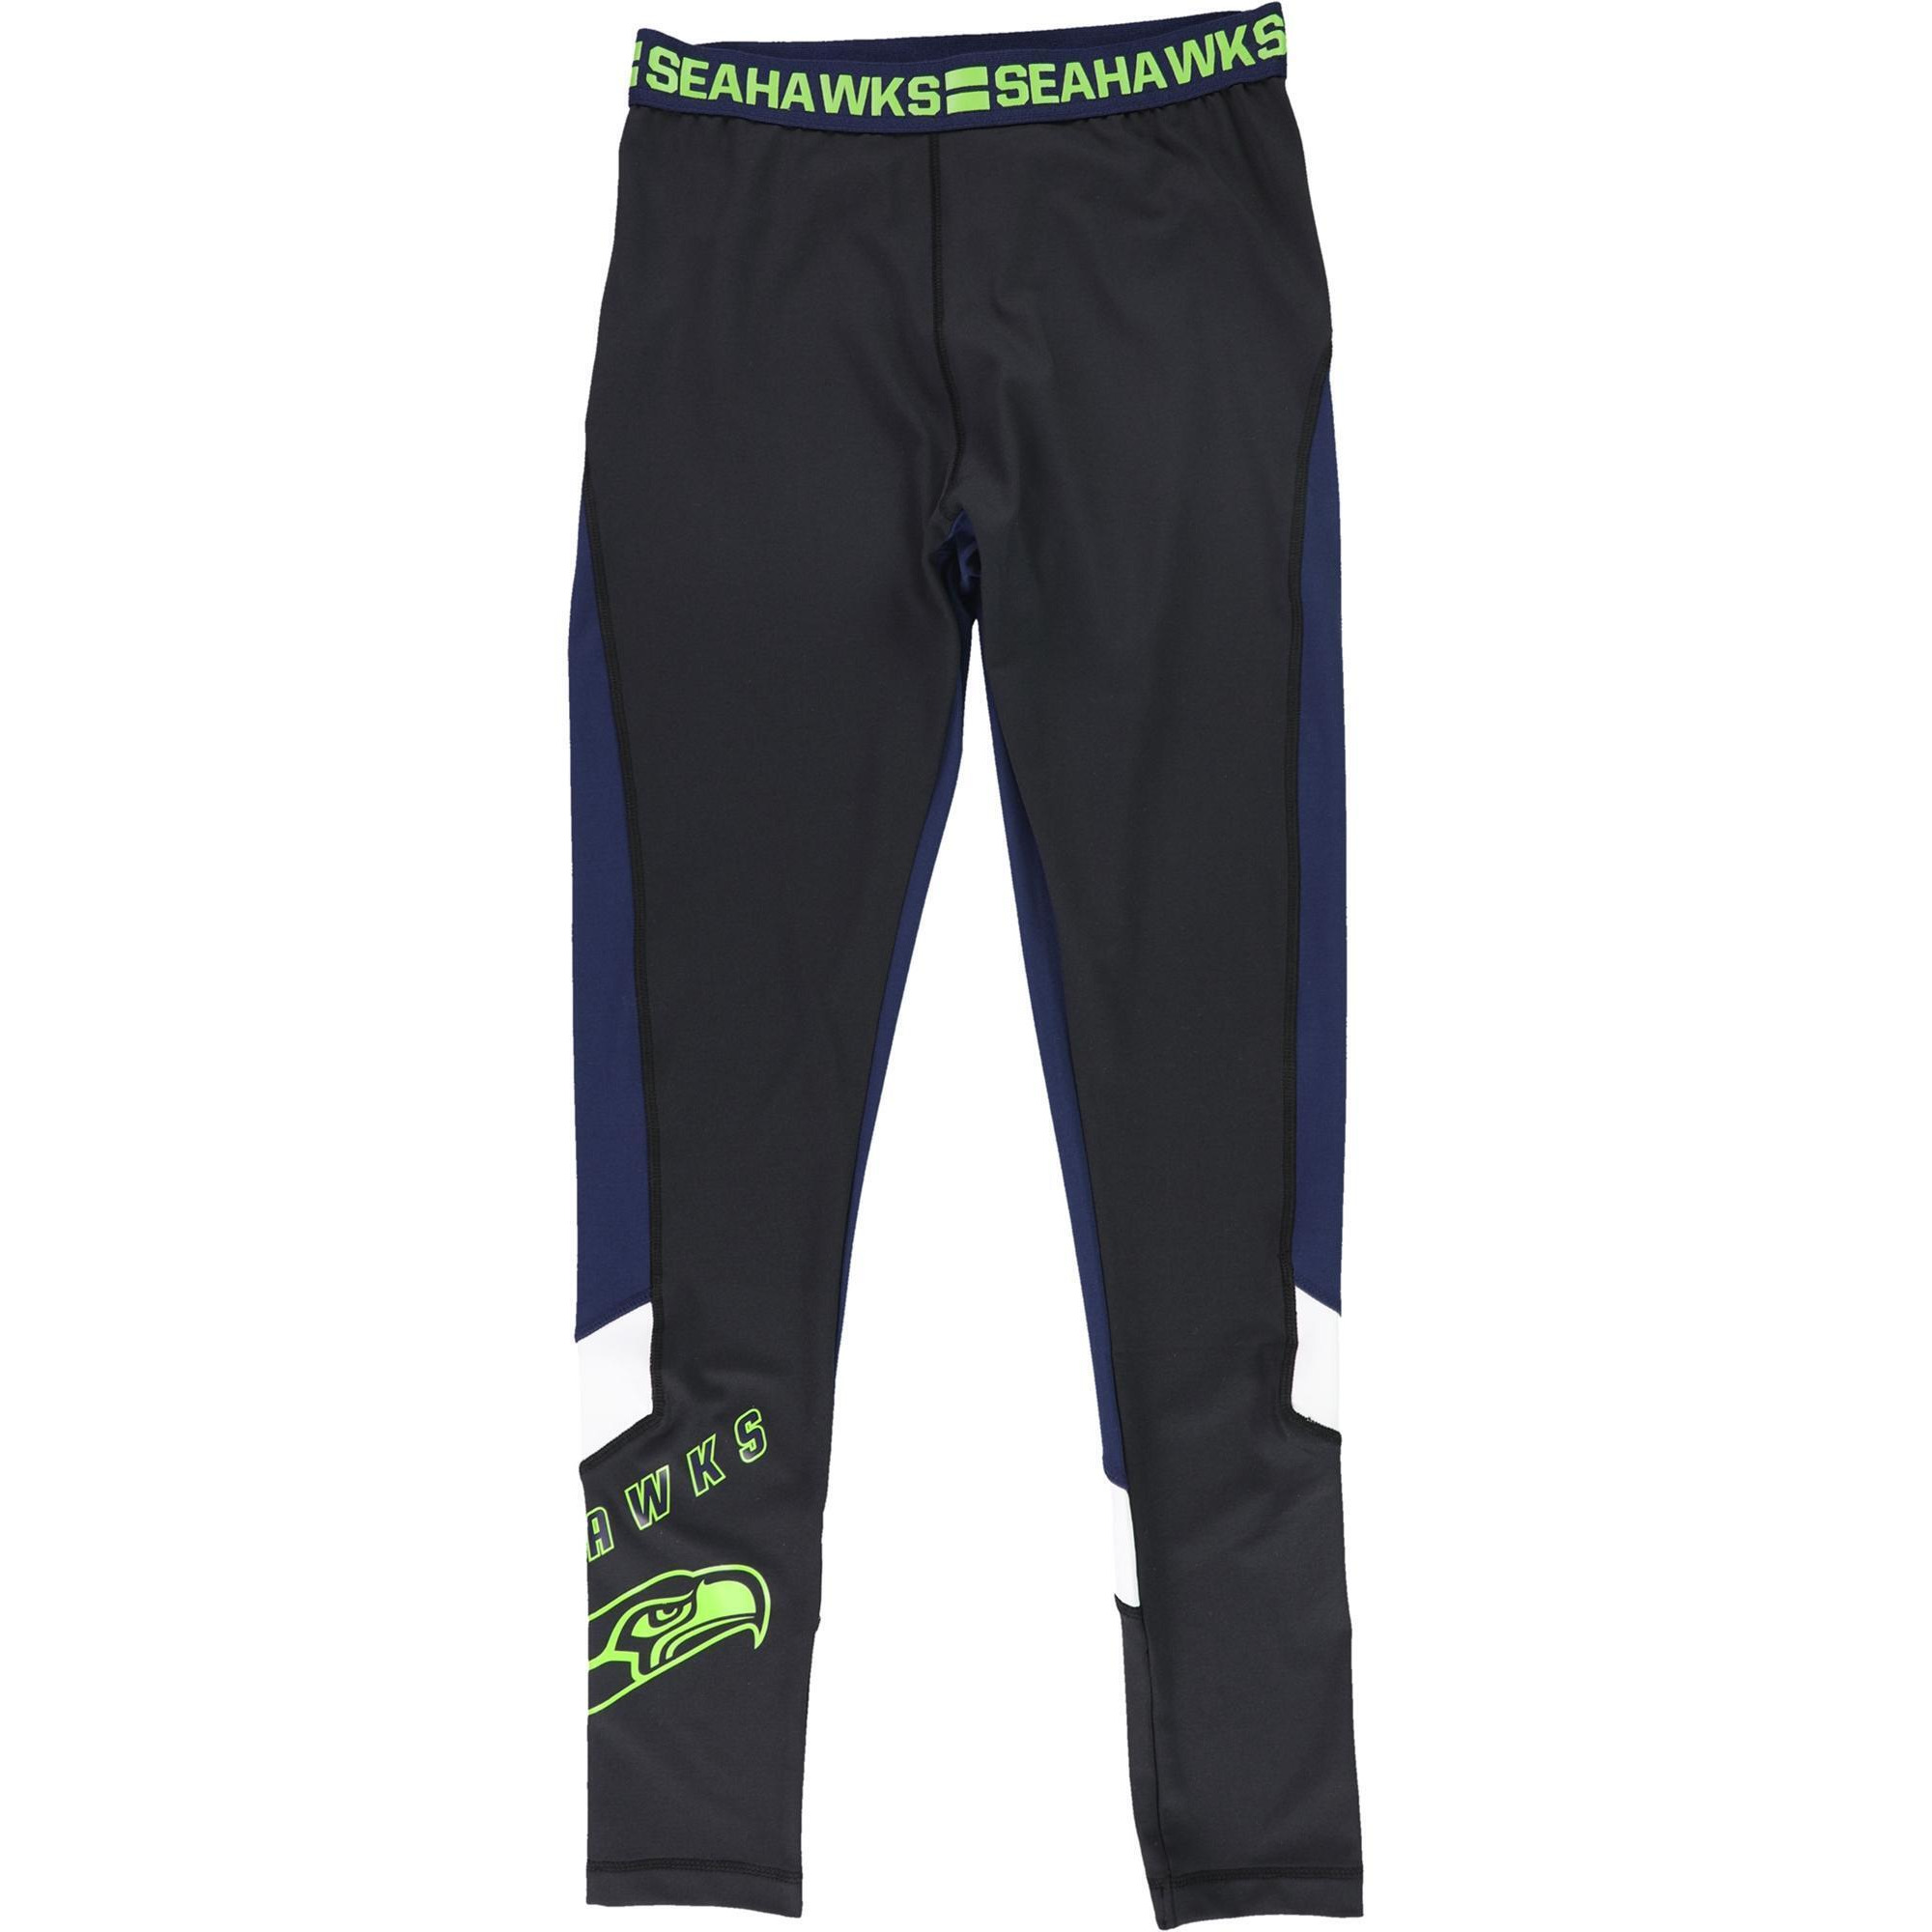 NFL Womens Seattle Seahawks Compression Athletic Pants, Style # 6J90Z452 alternate image